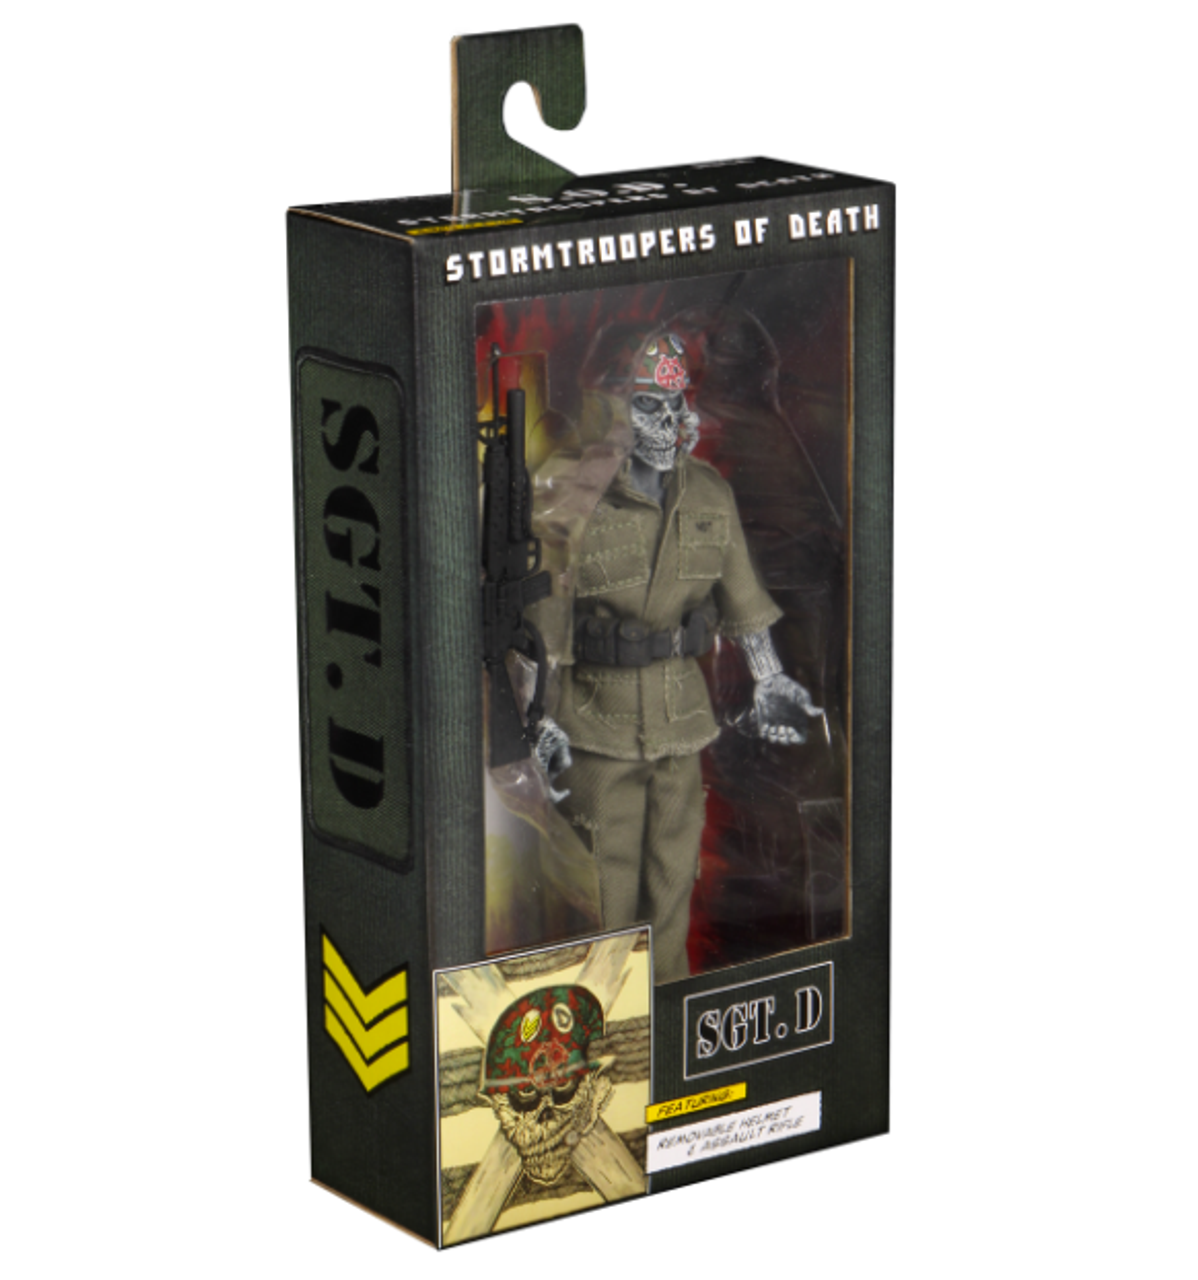 NECA 33668 S.O.D. Sgt. D 8" Clothed Action Figure 1